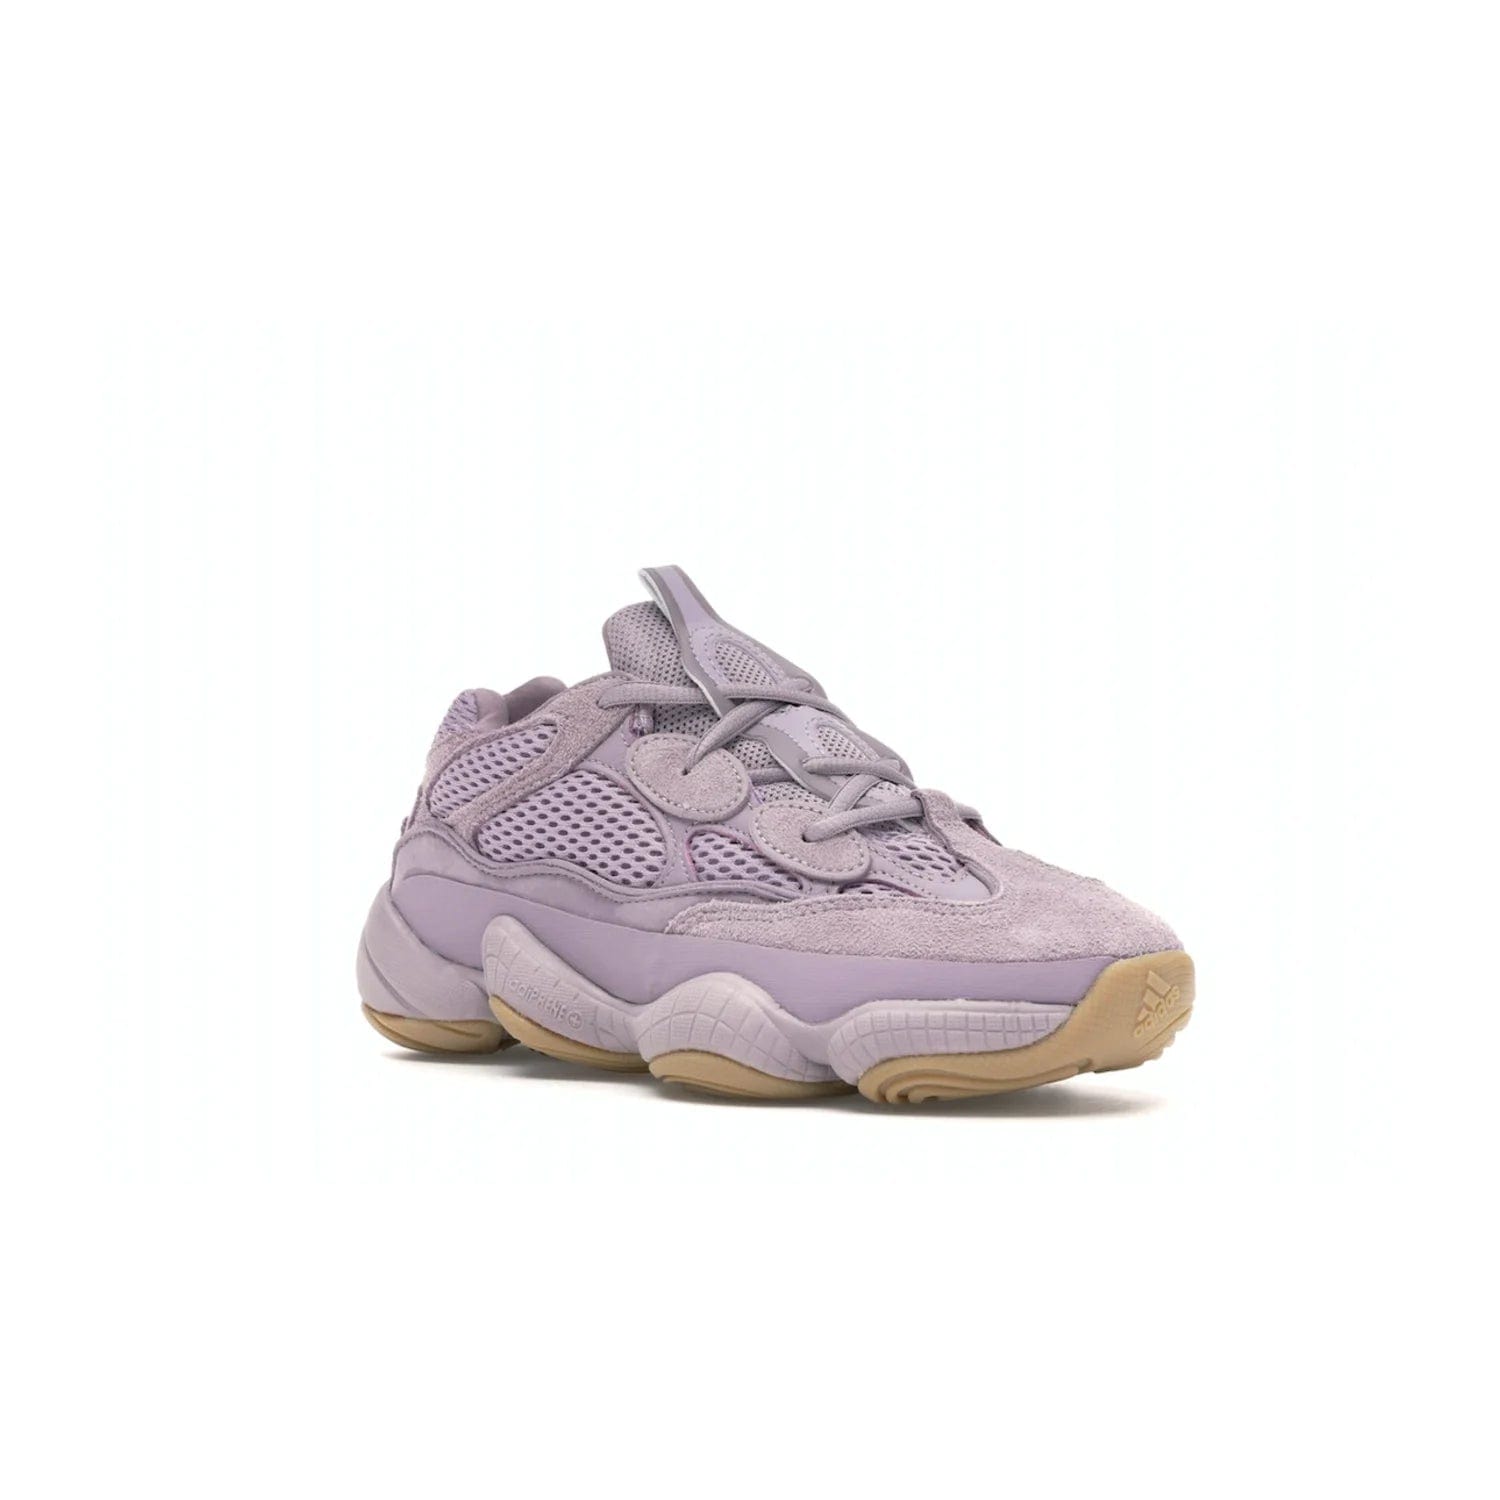 adidas Yeezy 500 Soft Vision - Image 5 - Only at www.BallersClubKickz.com - New adidas Yeezy 500 Soft Vision sneaker featuring a combination of mesh, leather, and suede in a classic Soft Vision colorway. Gum rubber outsole ensures durability and traction. An everyday sneaker that stands out from the crowd.